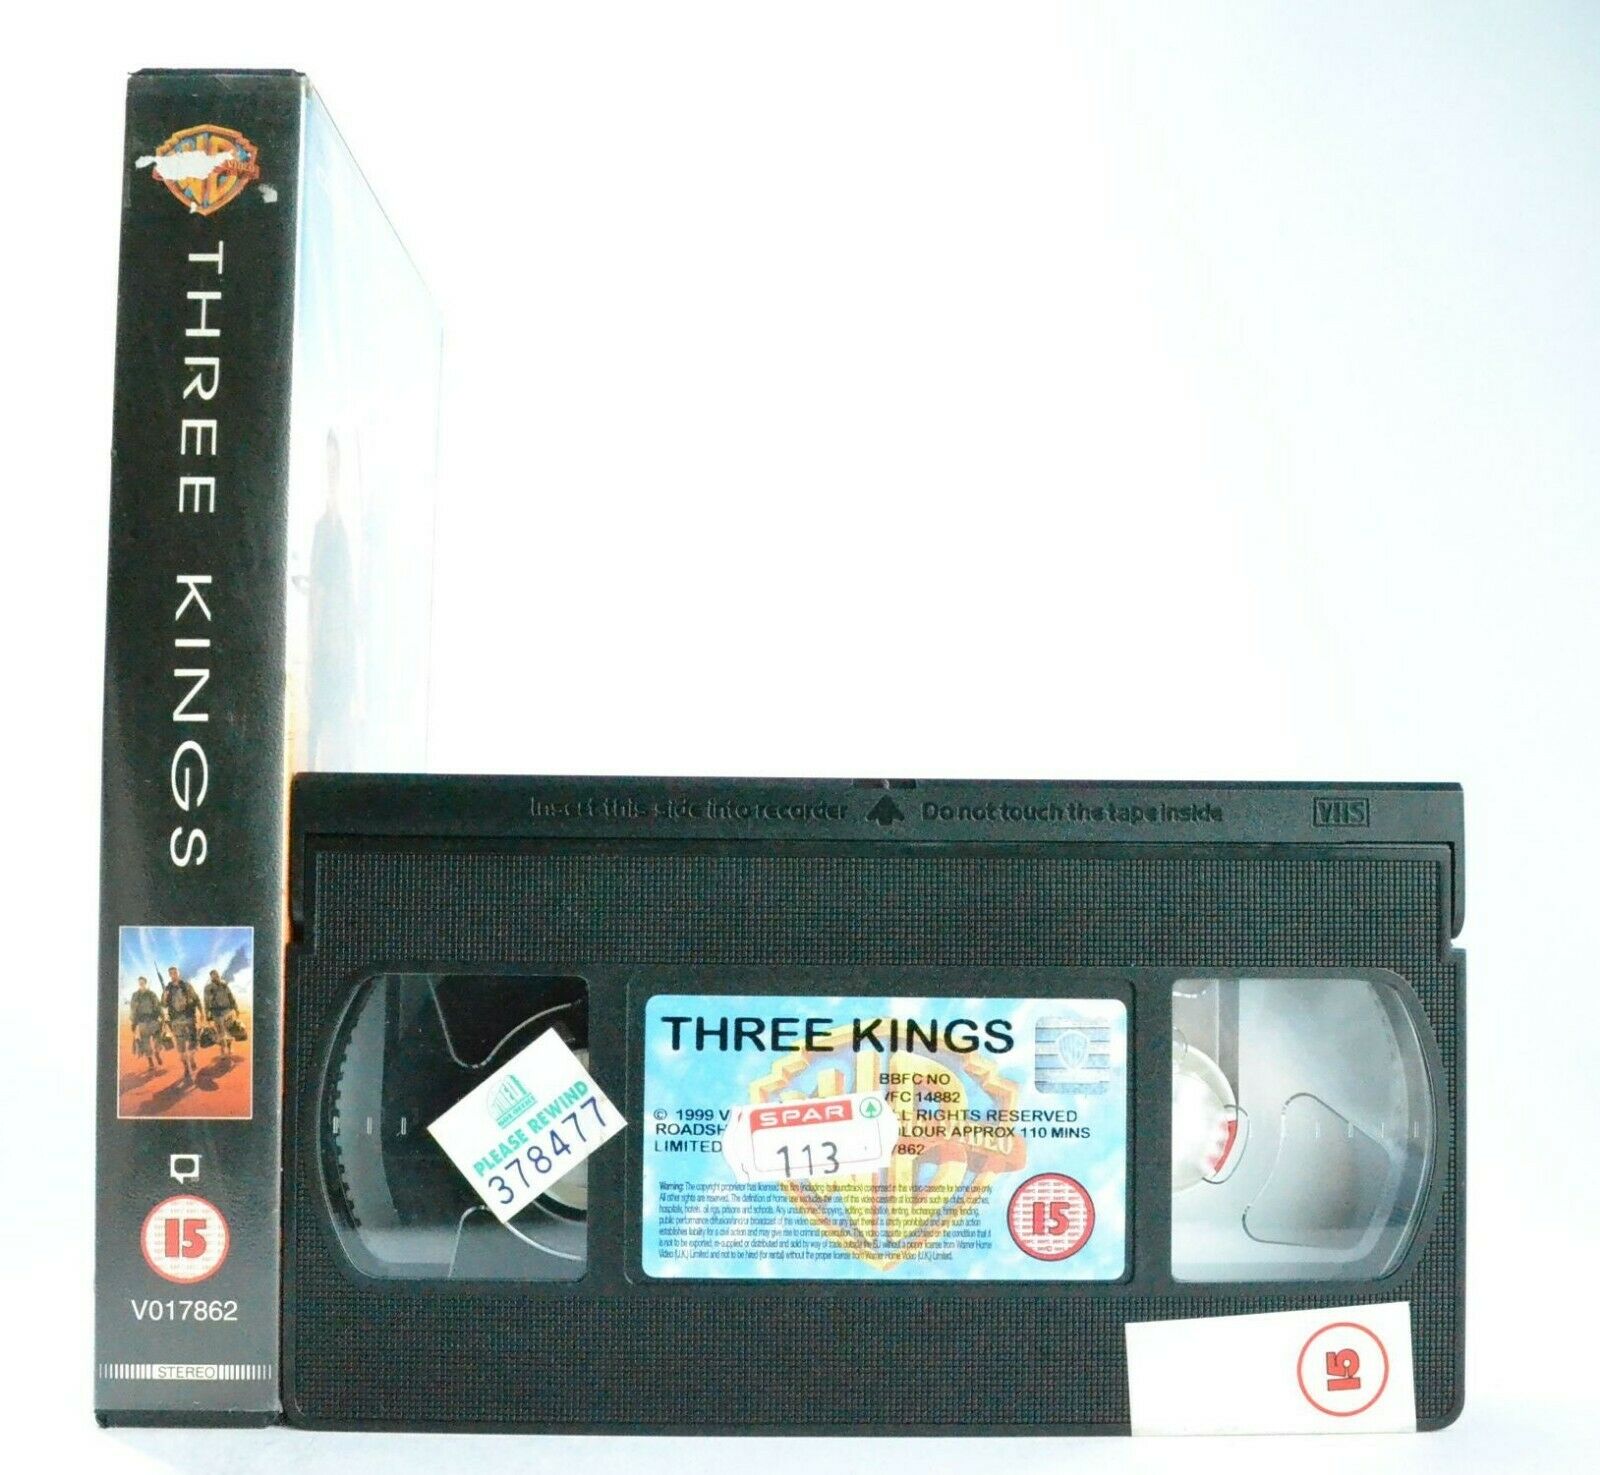 Three Kings: G.Clooney/M.Wahlberg - Action/Adventure (1999) - Large Box - VHS-